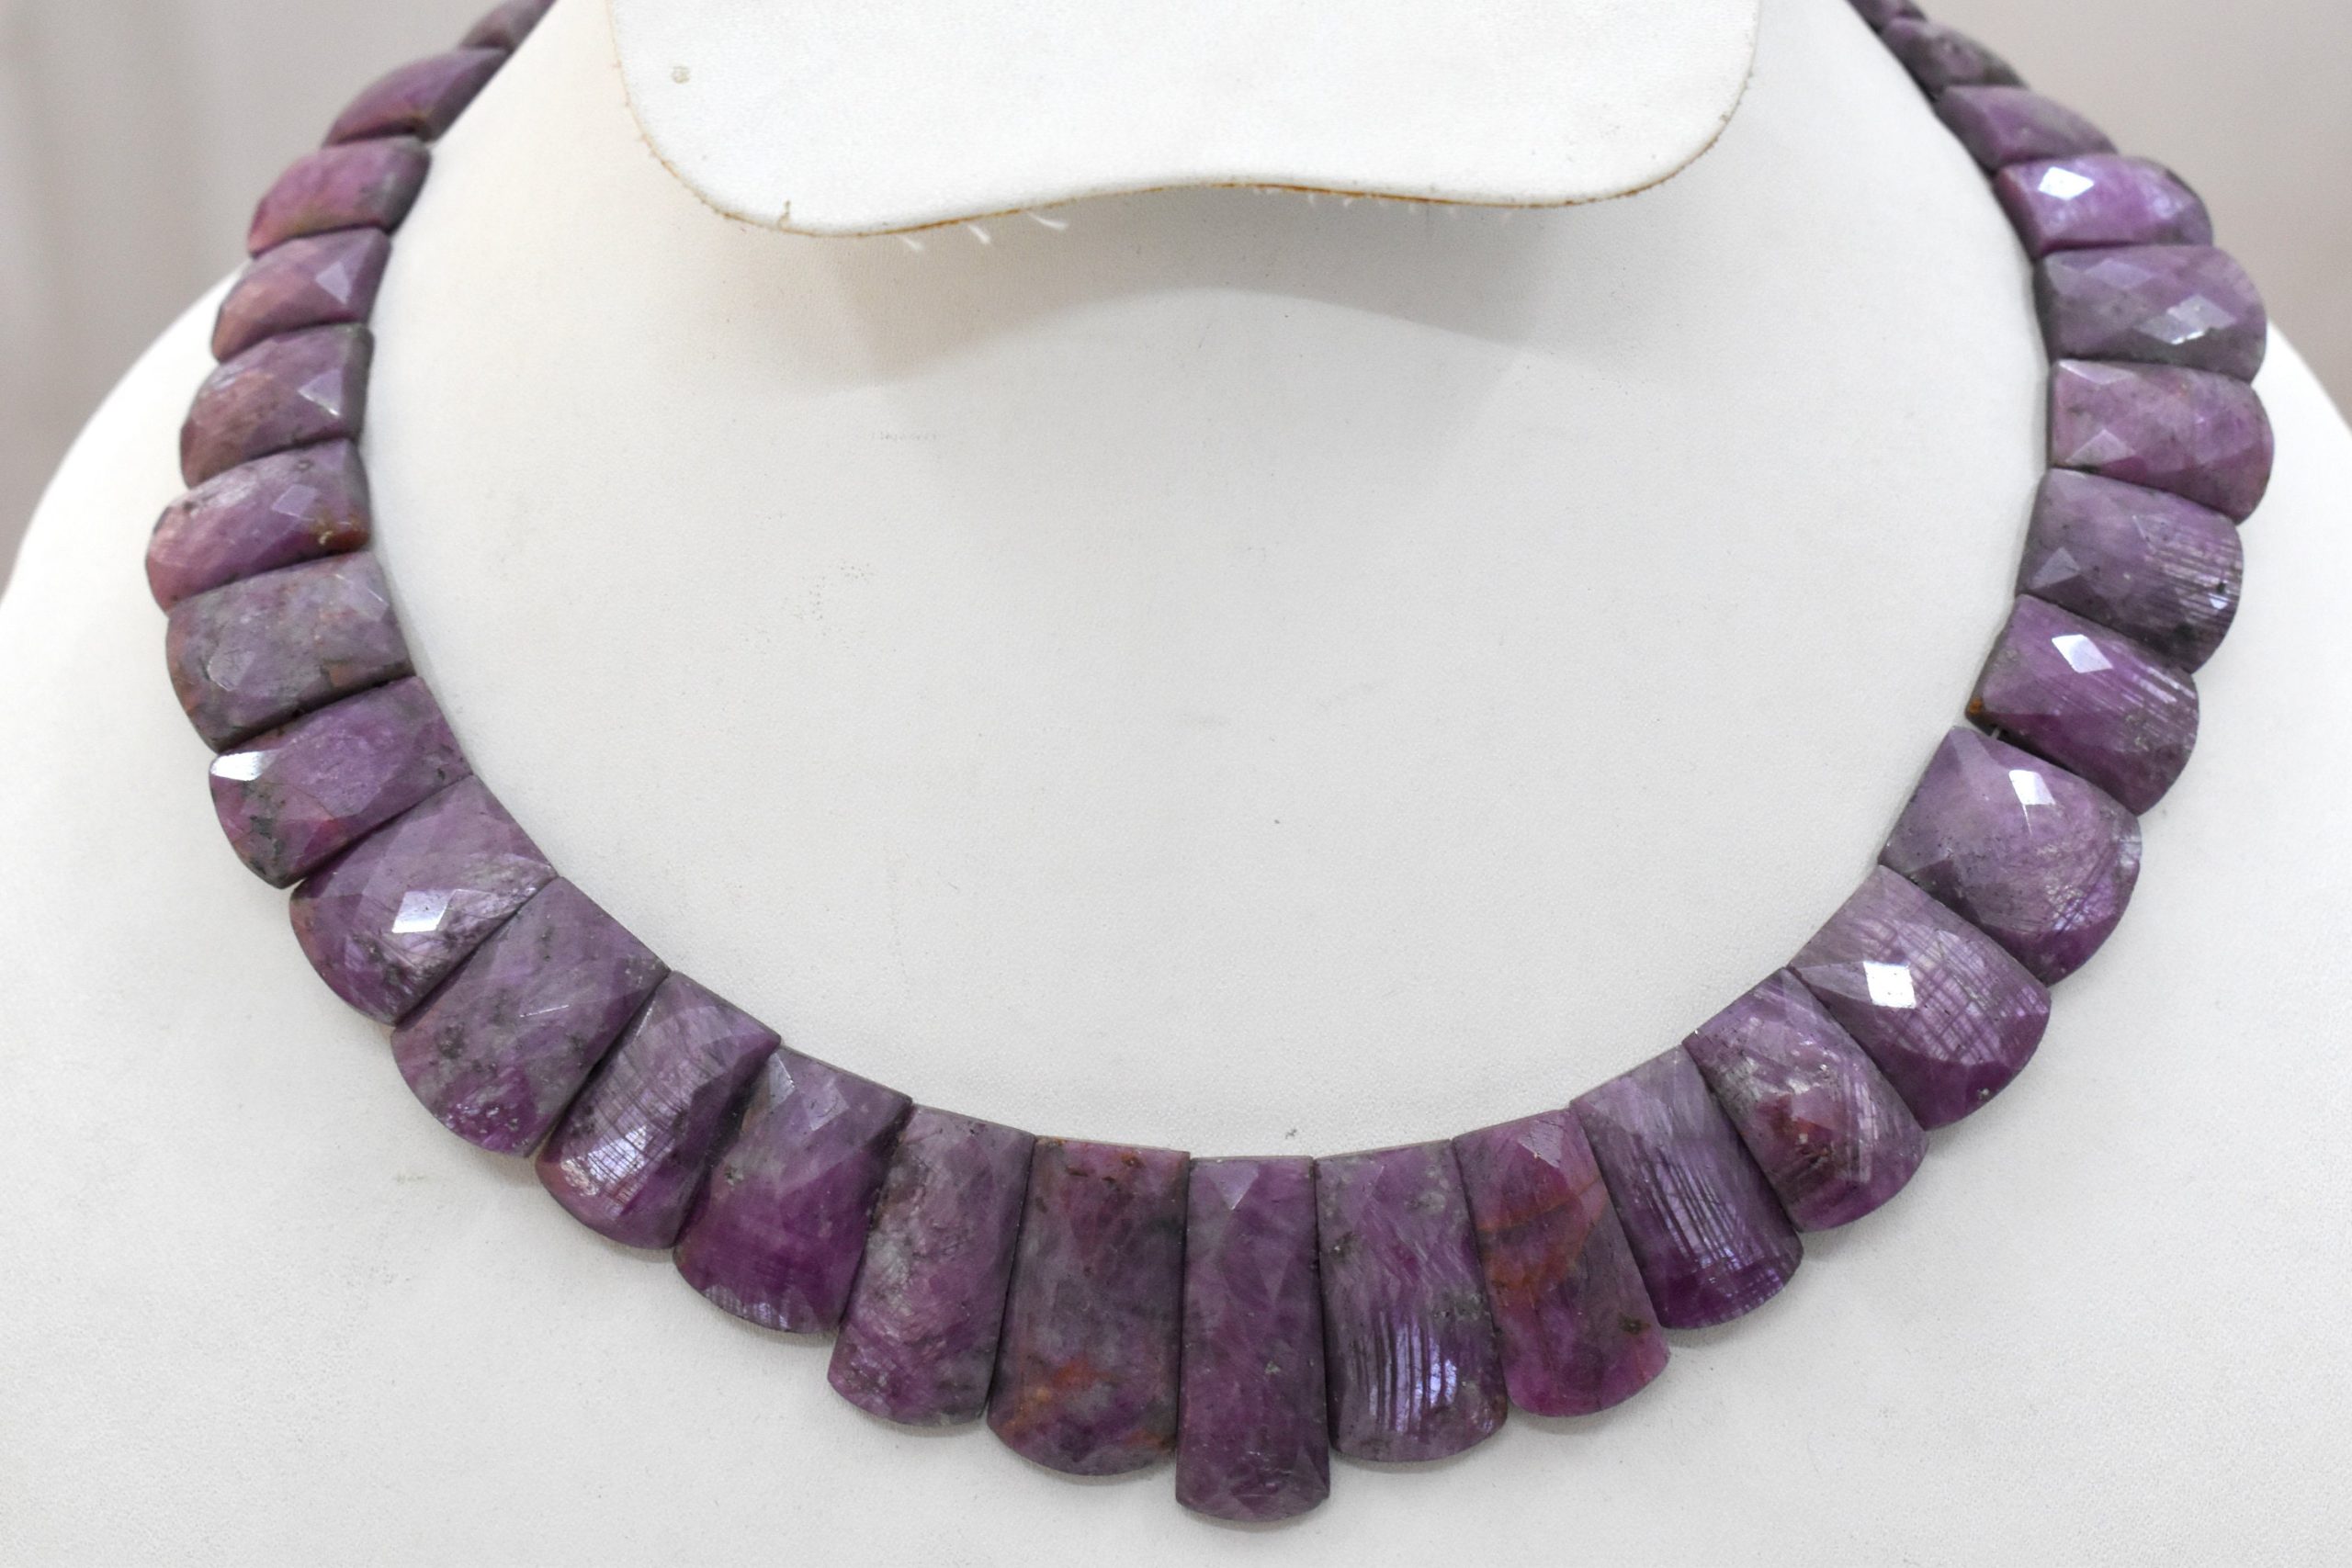 100% Natural Ruby Handmade Necklace,Collar Necklace,Princess Necklace,Choker Necklace,Bib Necklace,Matinee Necklace,Handicraft Necklace. | Save 33% - Rajasthan Living 12